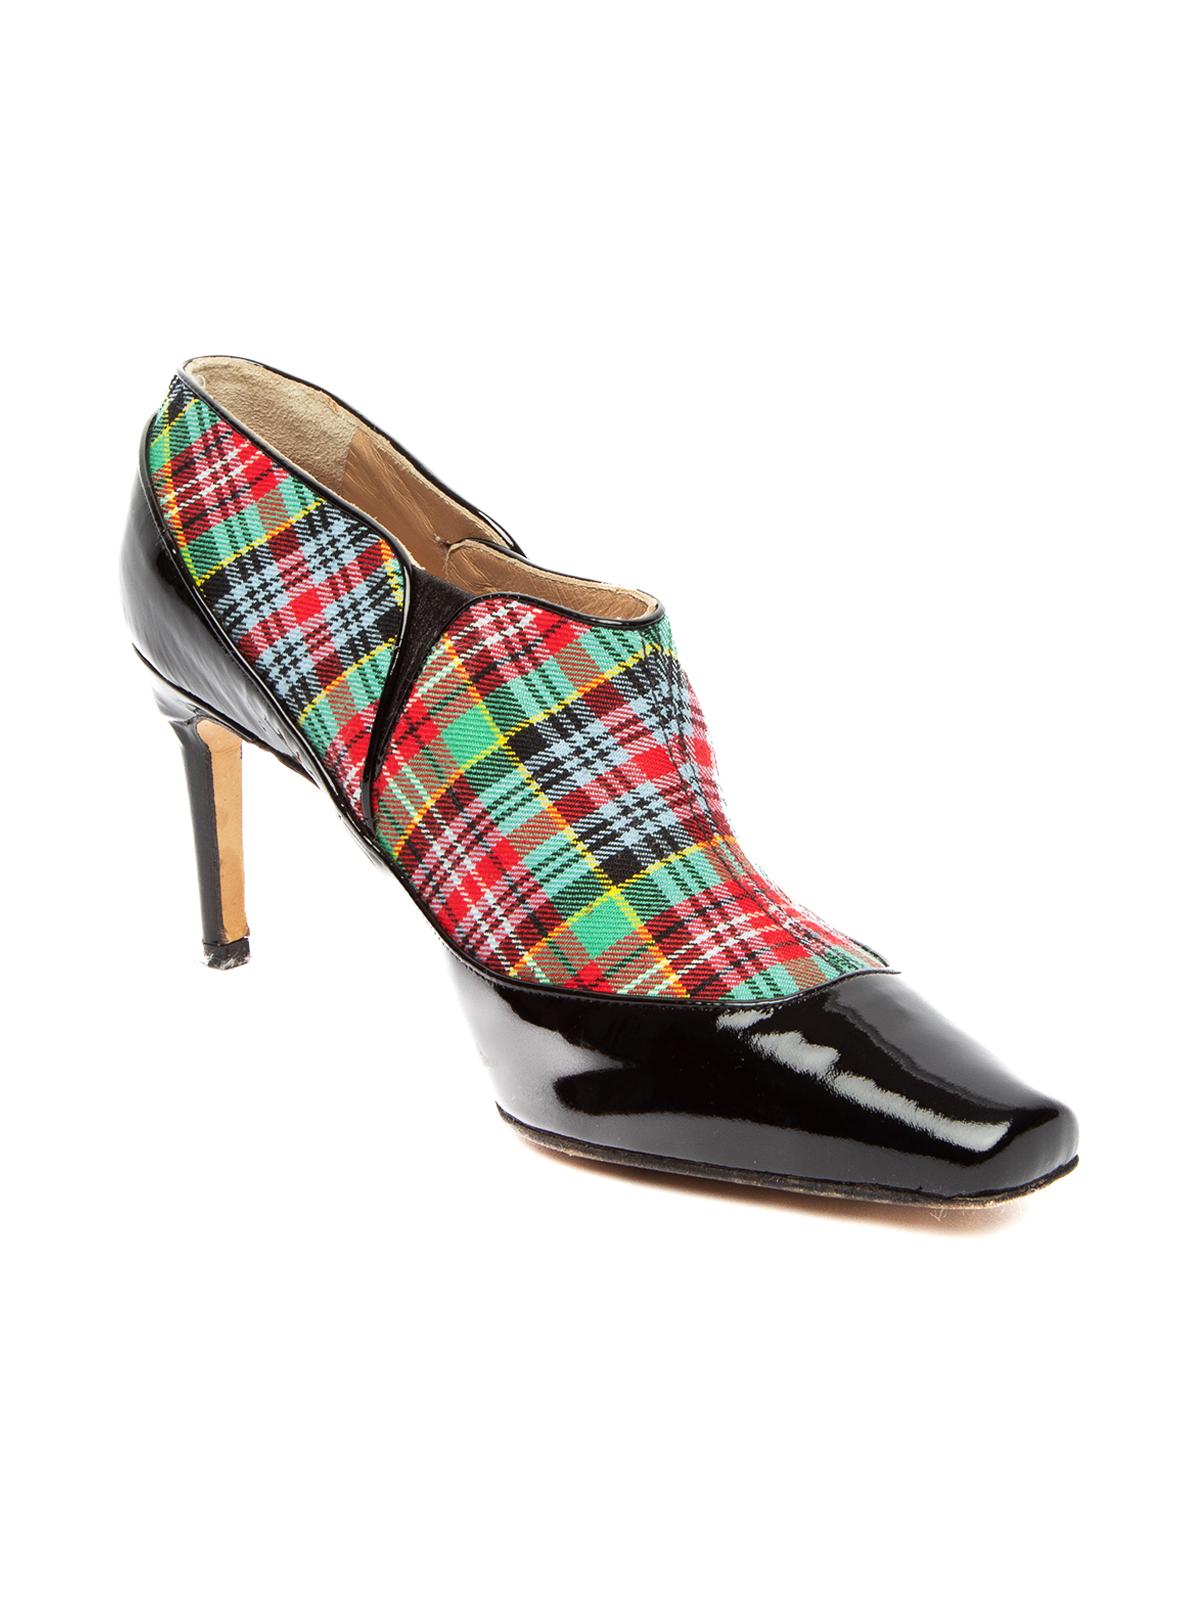 CONDITION is Very good. There are slight signs of wear to the patent leather and tartan fabric exterior, with wear to the exterior soles too. Details Low ankle cut Button details Square toe Comes with the original dust bag Composition Patent Leather